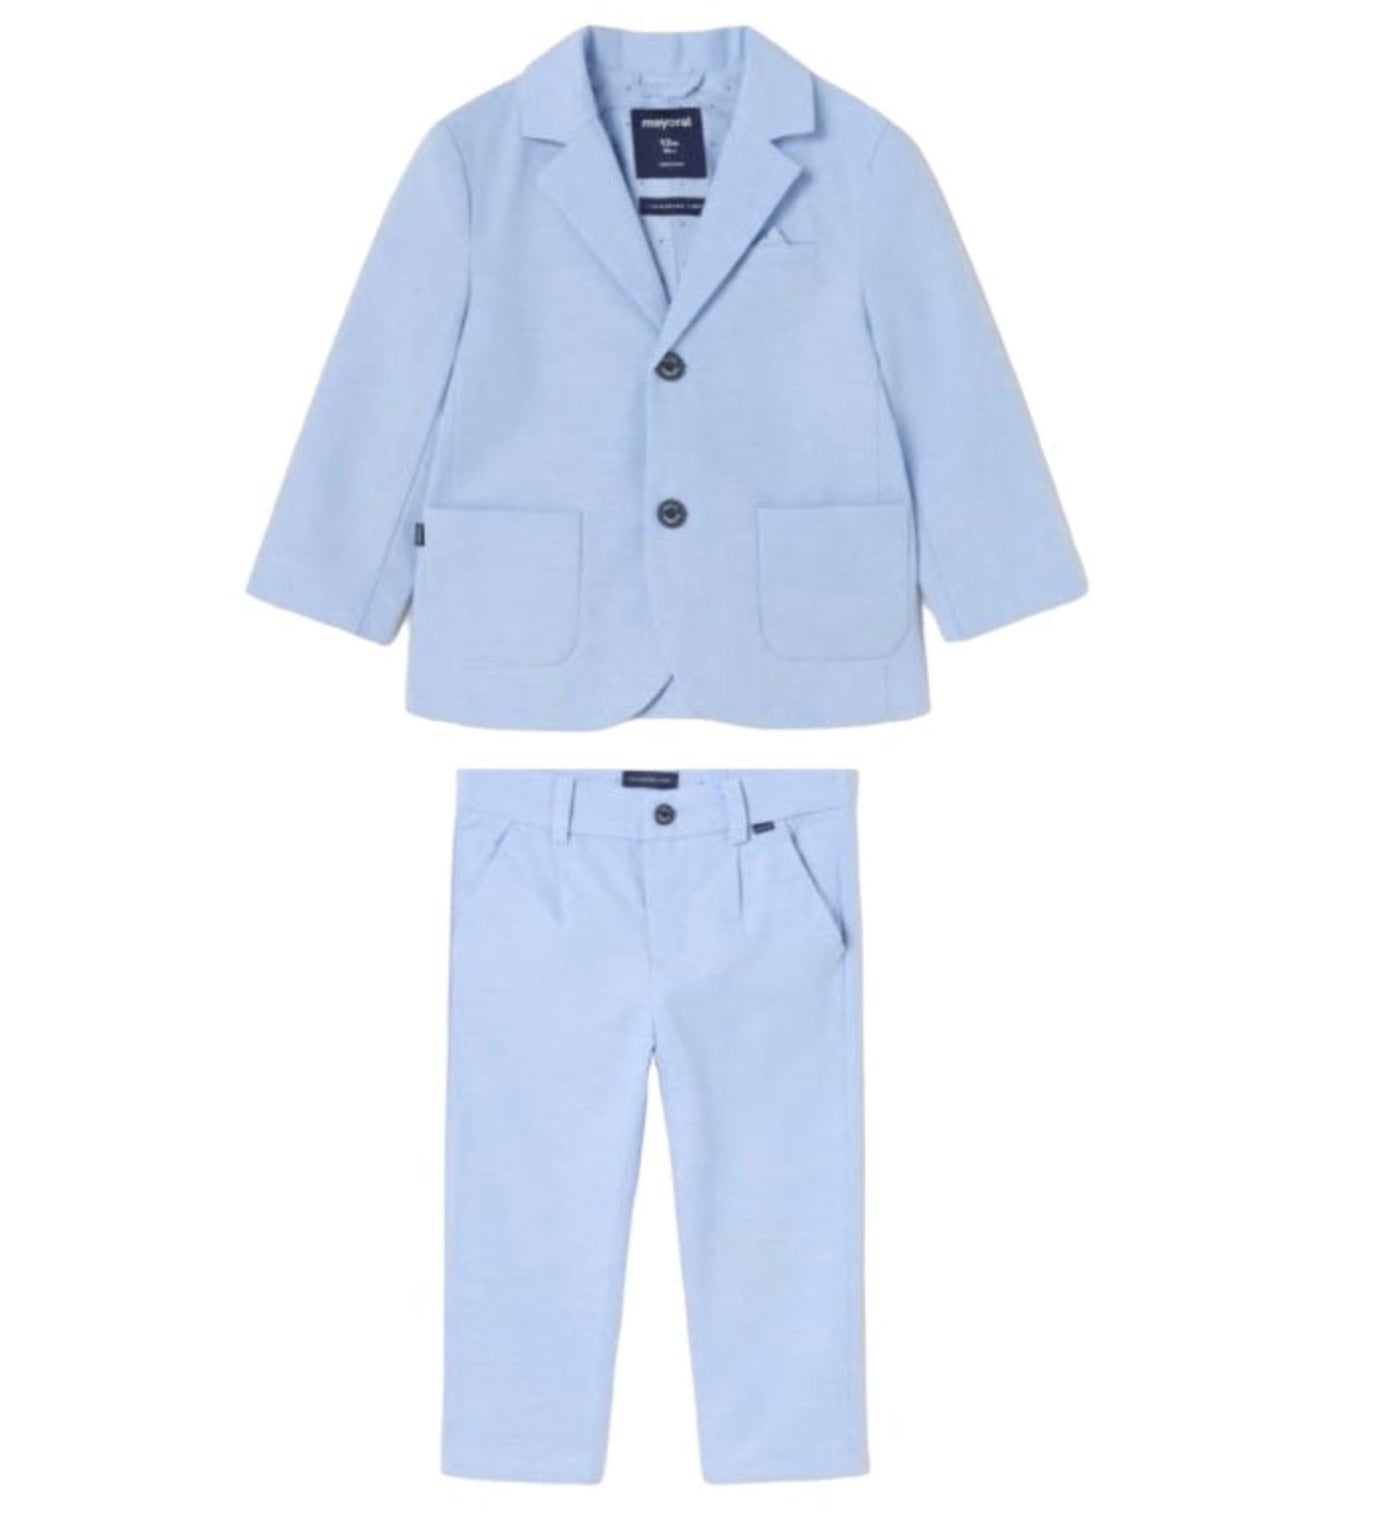 Mayoral Boys Baby & Toddler BLUE Linen Suit